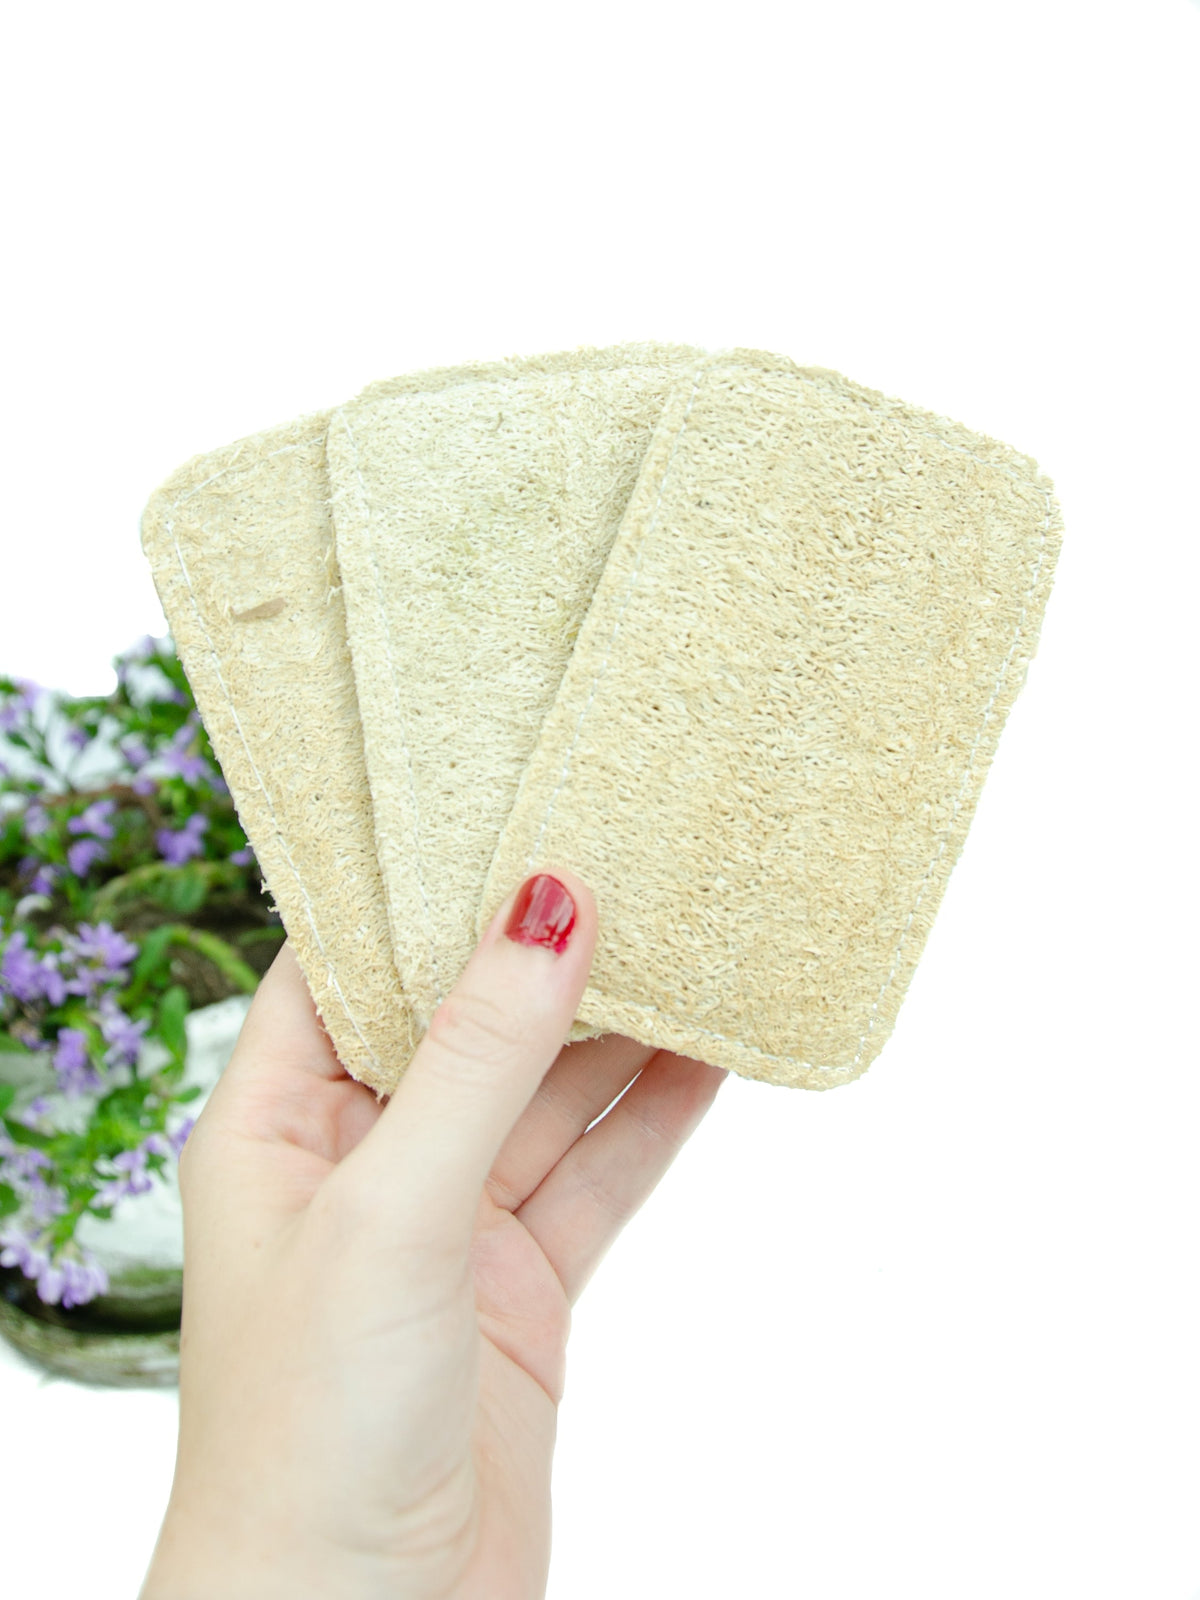 3 Pack Eco Dish Sponges, eco-friednly loofa sponges, zero waste kitchen, sustainable sponges